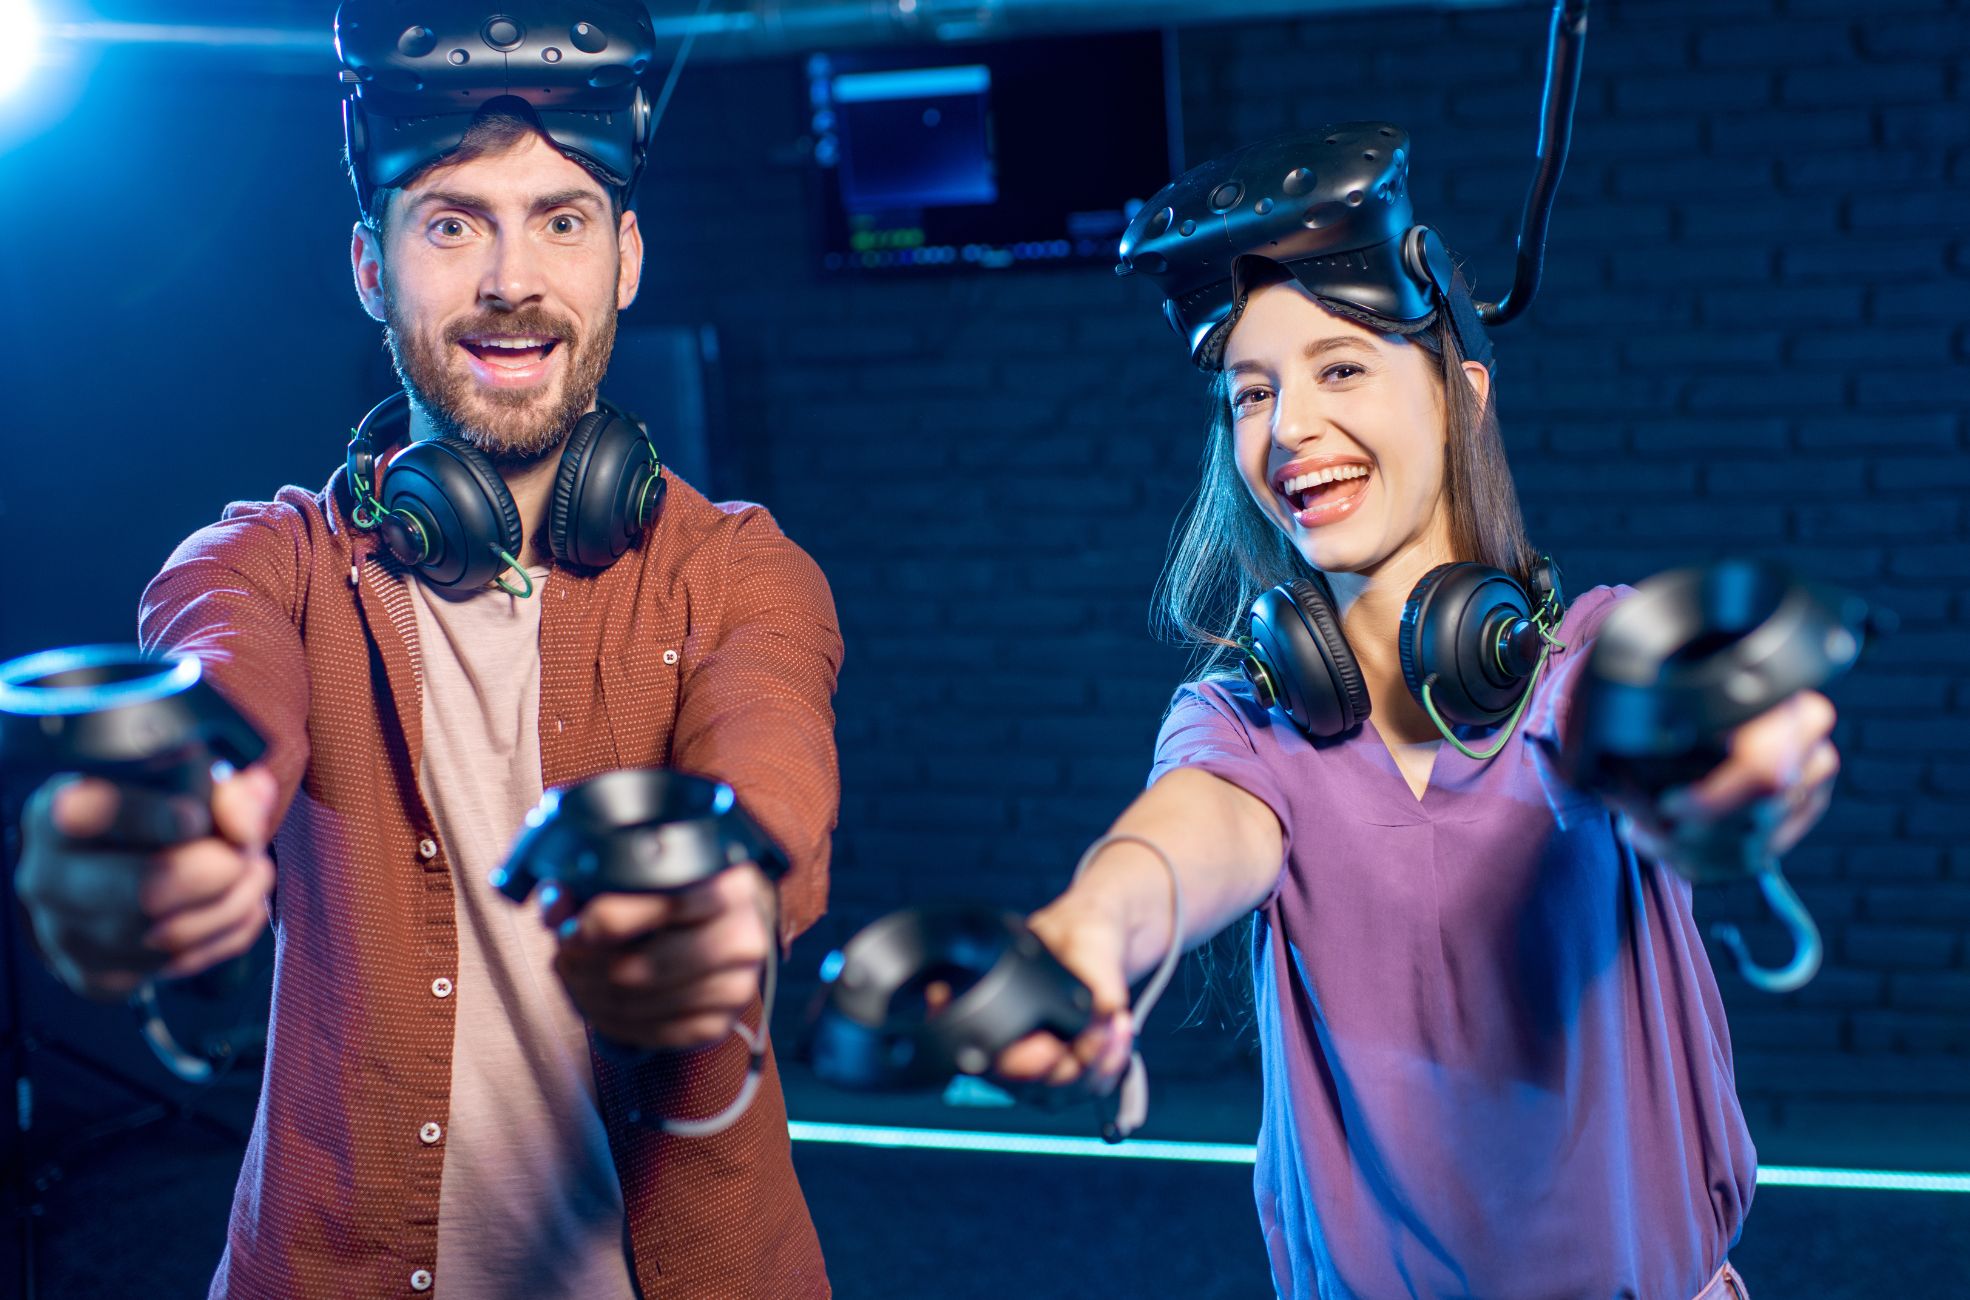 People Using VR For Immersive Gaming